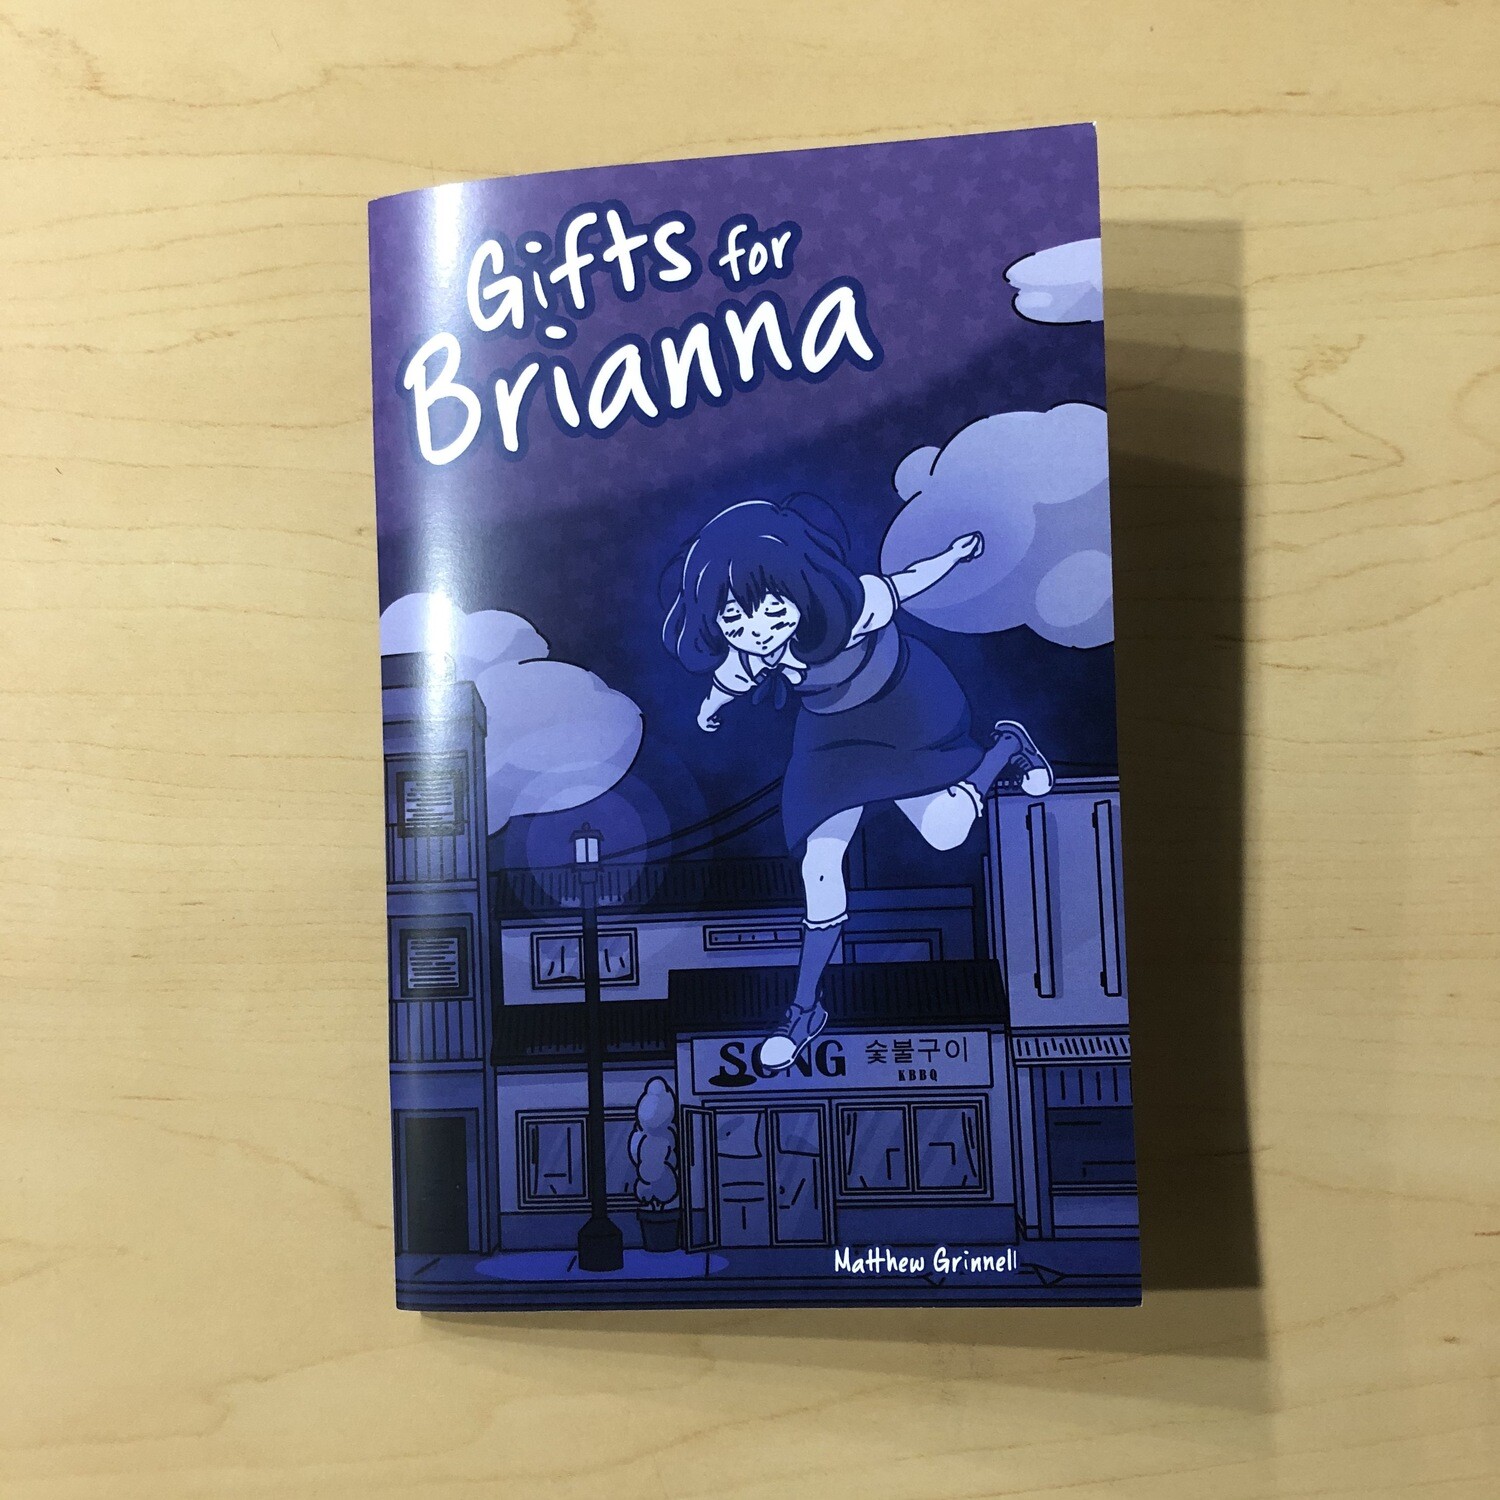 Gifts For Brianna - Book by Matthew Grinnell